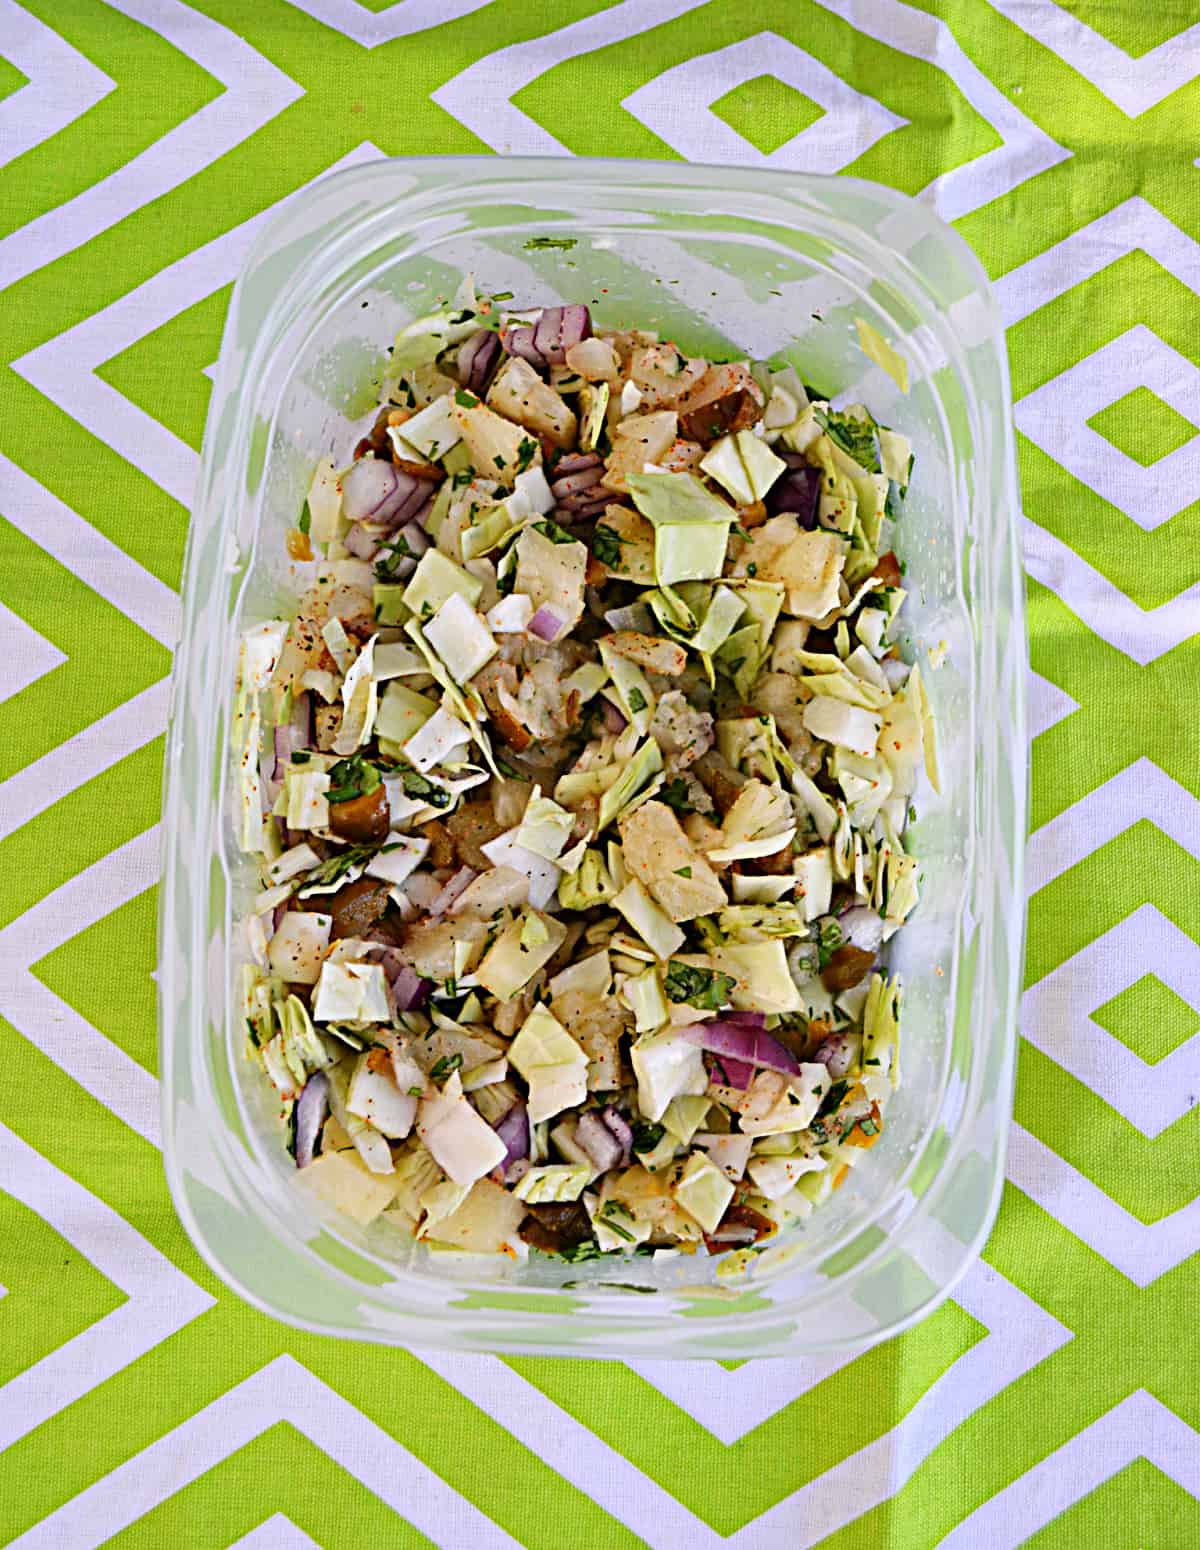 A container of jalapeno pineapple slaw.